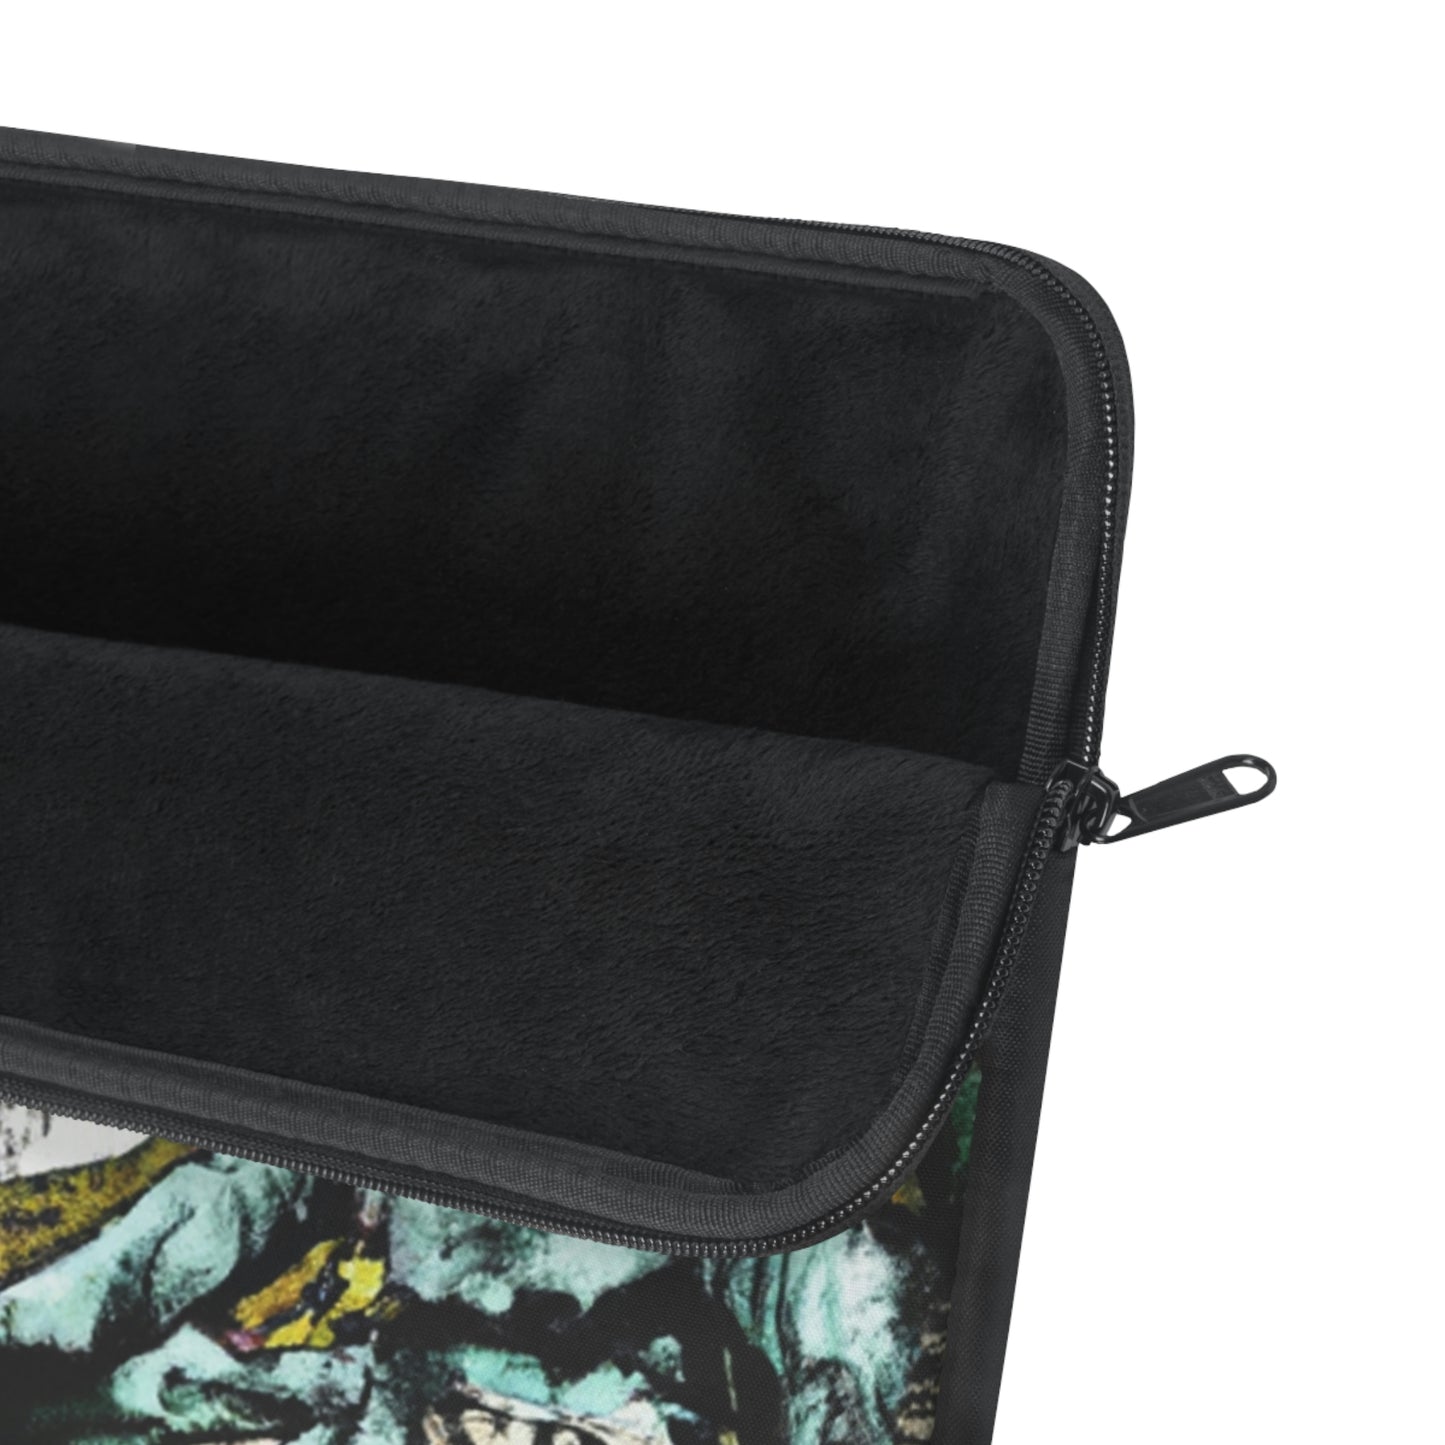 Billy Bopster - Comic Book Collector Laptop Computer Sleeve Storage Case Bag